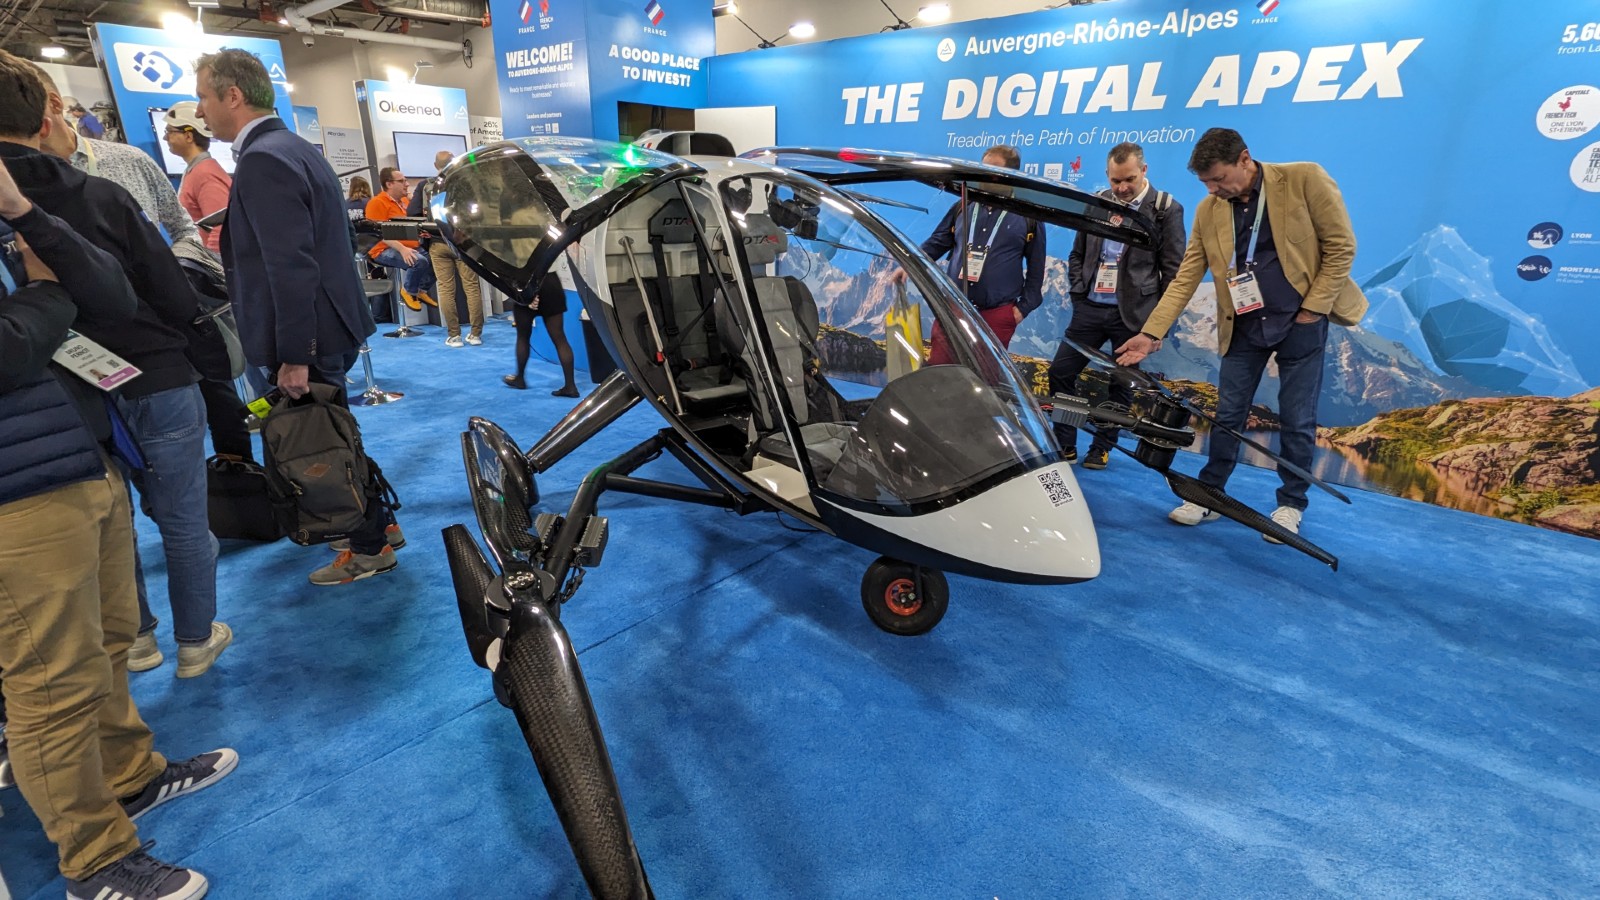 Digital Apex is a drone on display at the exhibition.